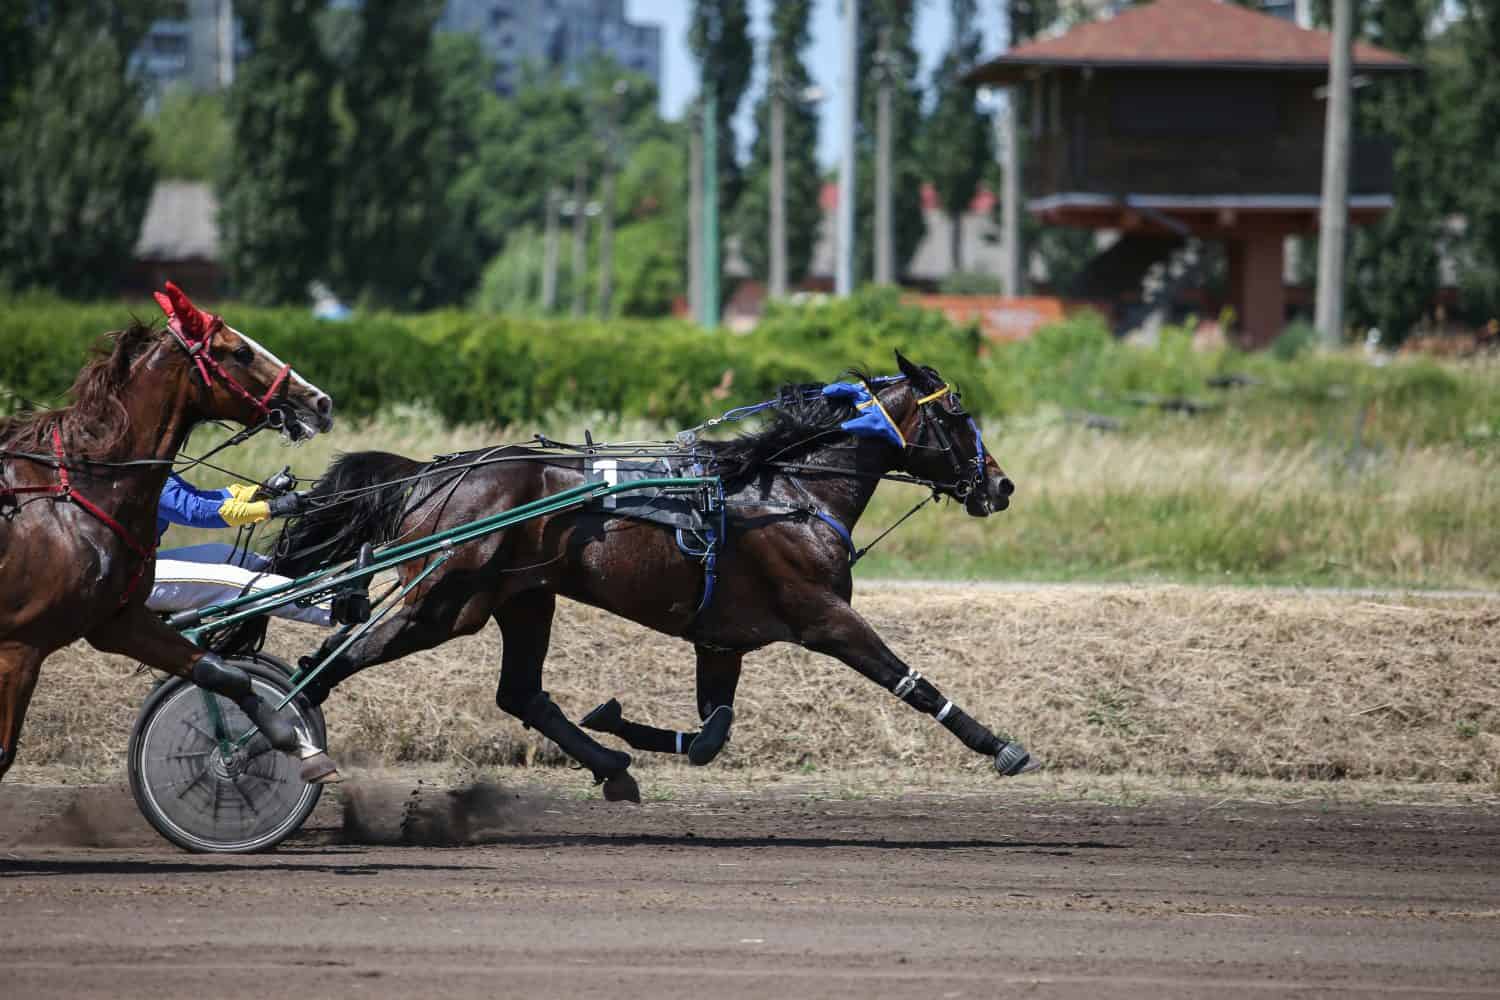 Hippodrome. Competition for French Trotter horses. A group of horses in harness races.